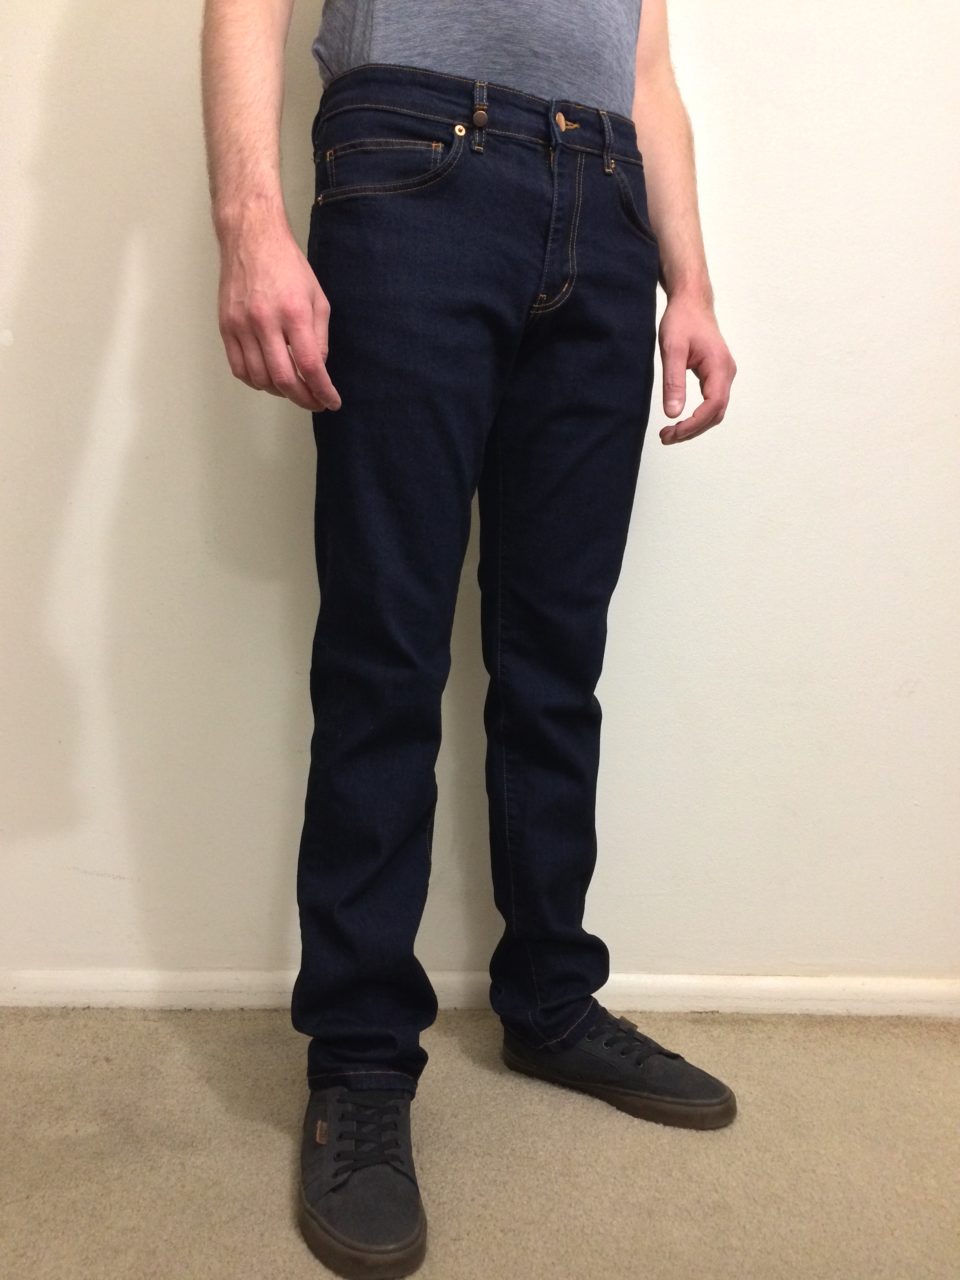 levi's size 28 in us